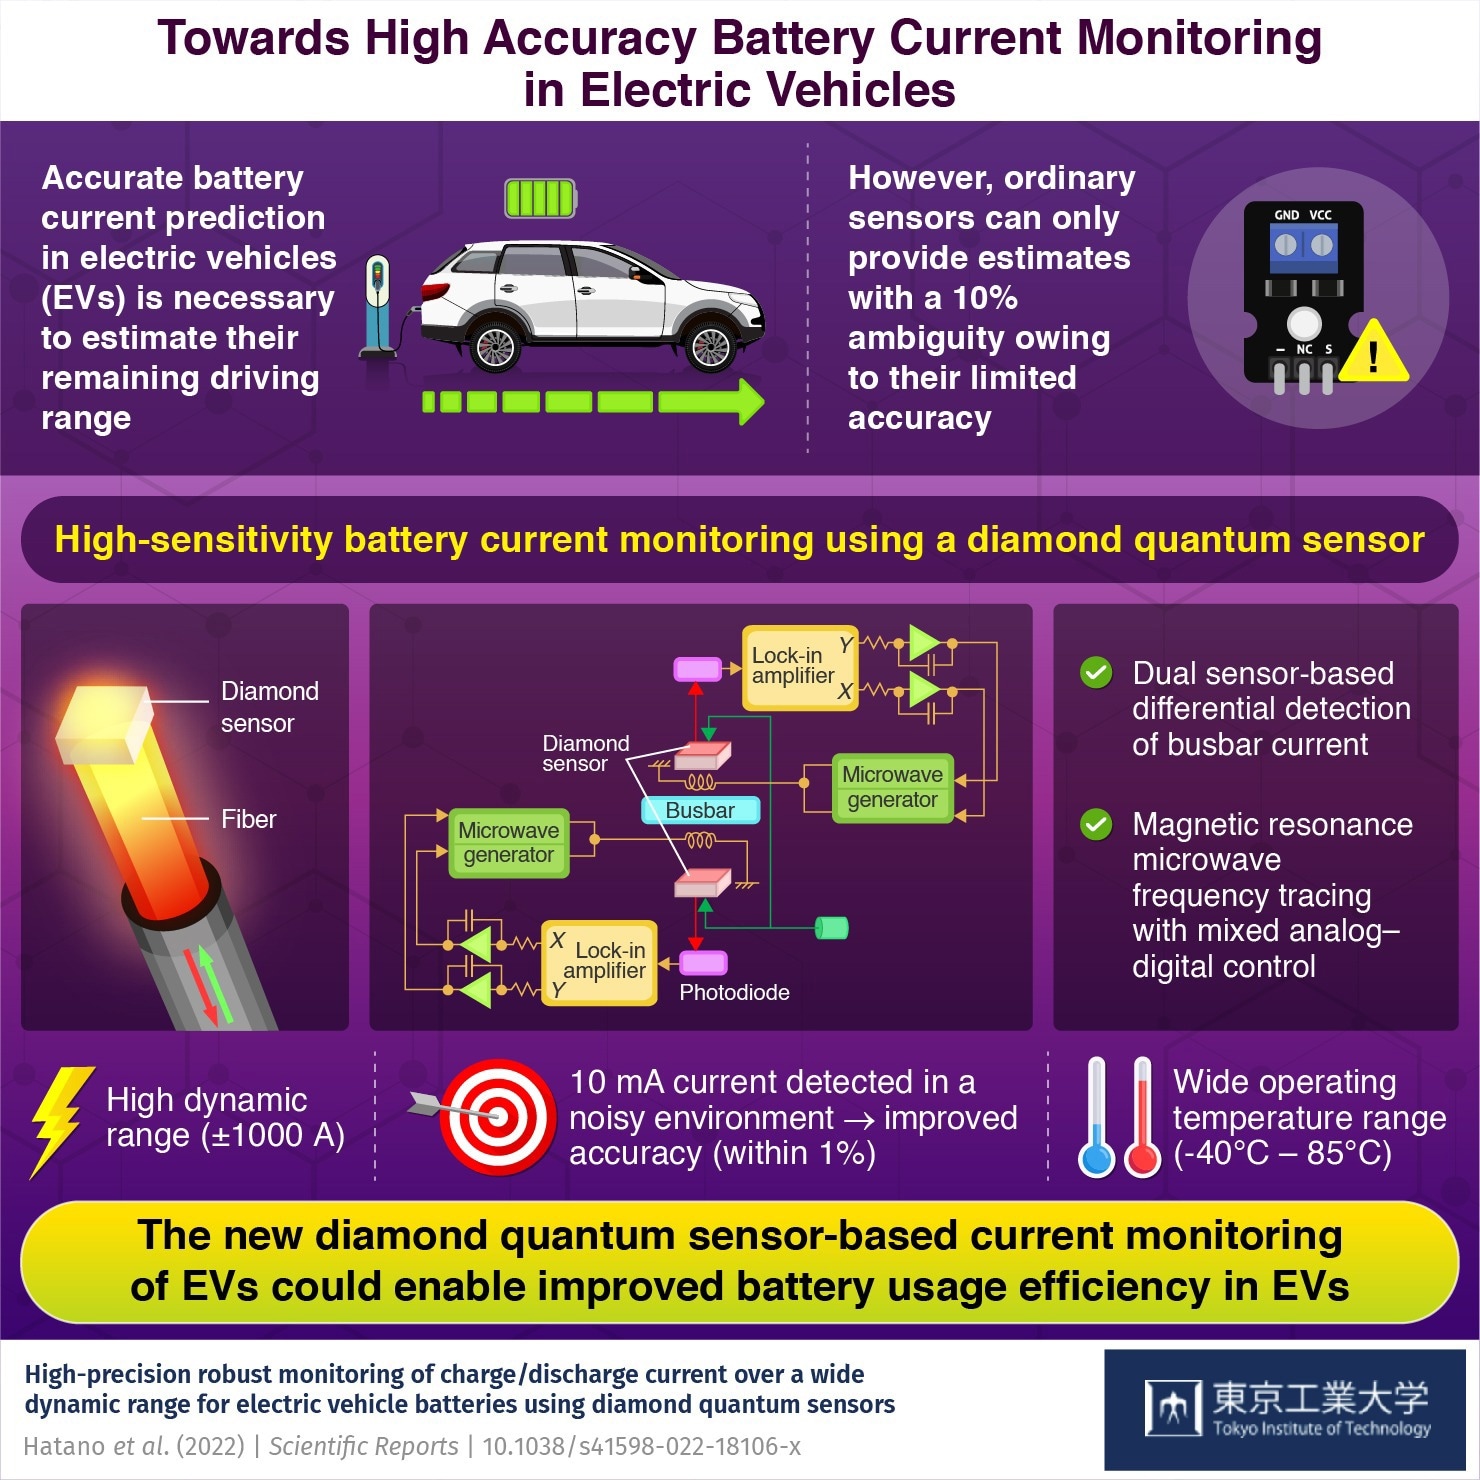 HighAccuracy Electric Vehicle Battery Monitoring with Diamond Quantum